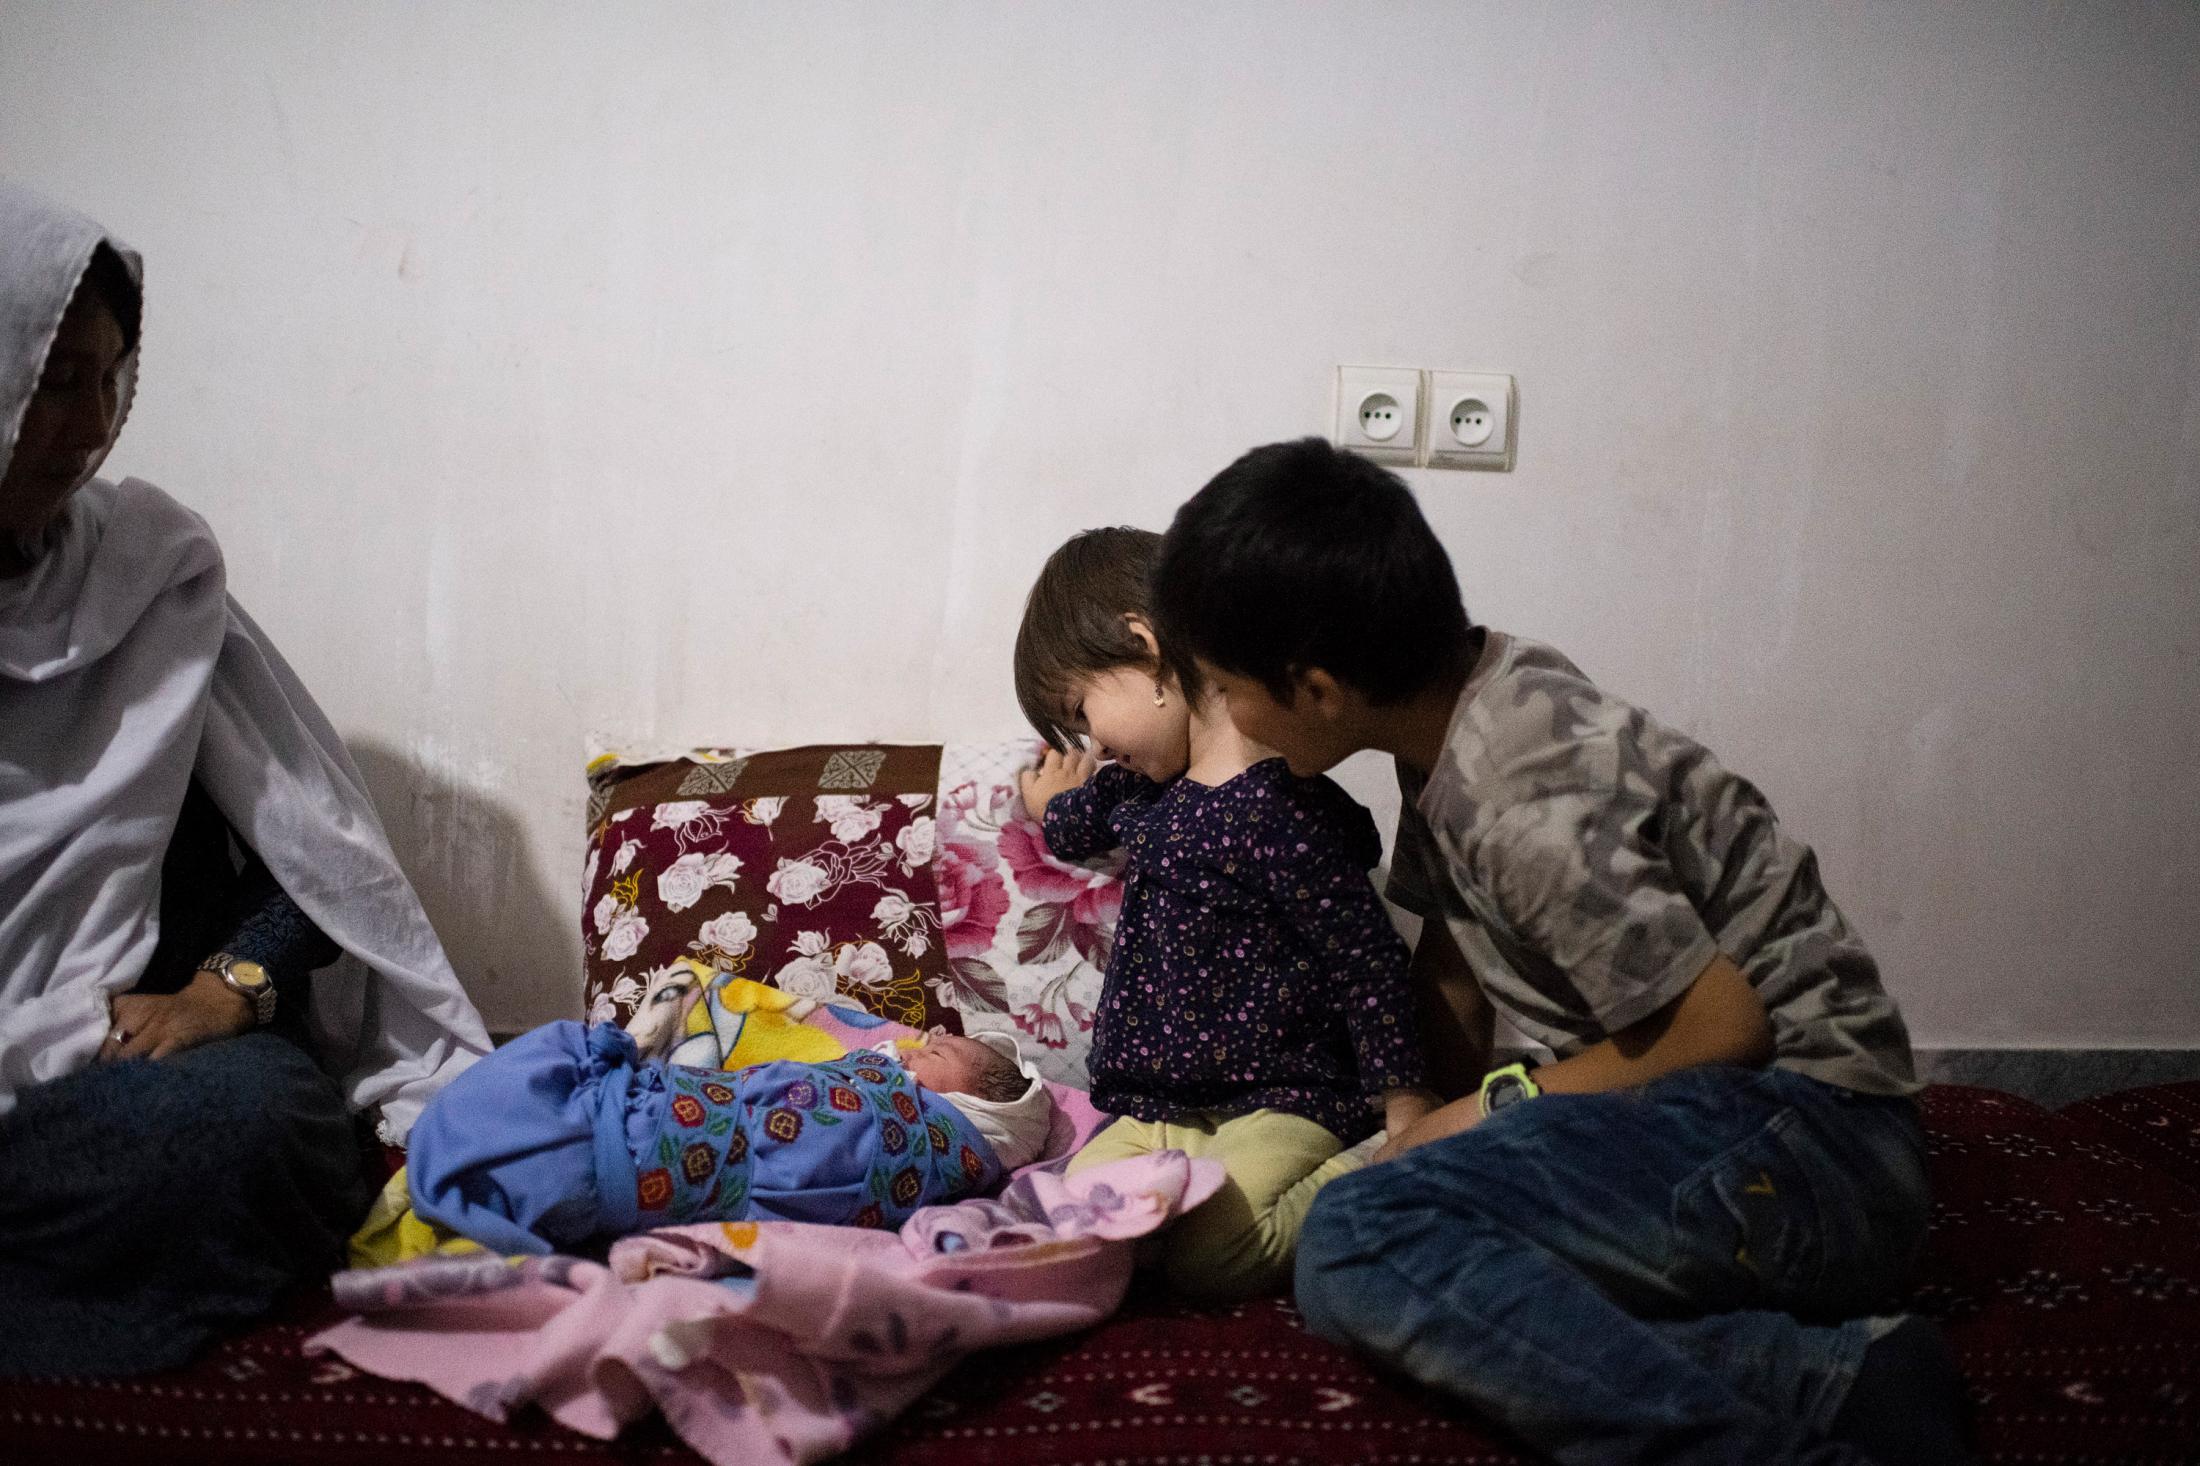 A Generation of Afghan Widows - KABUL | AFGHANISTAN | 8/3/18 | Sofia's first interaction...